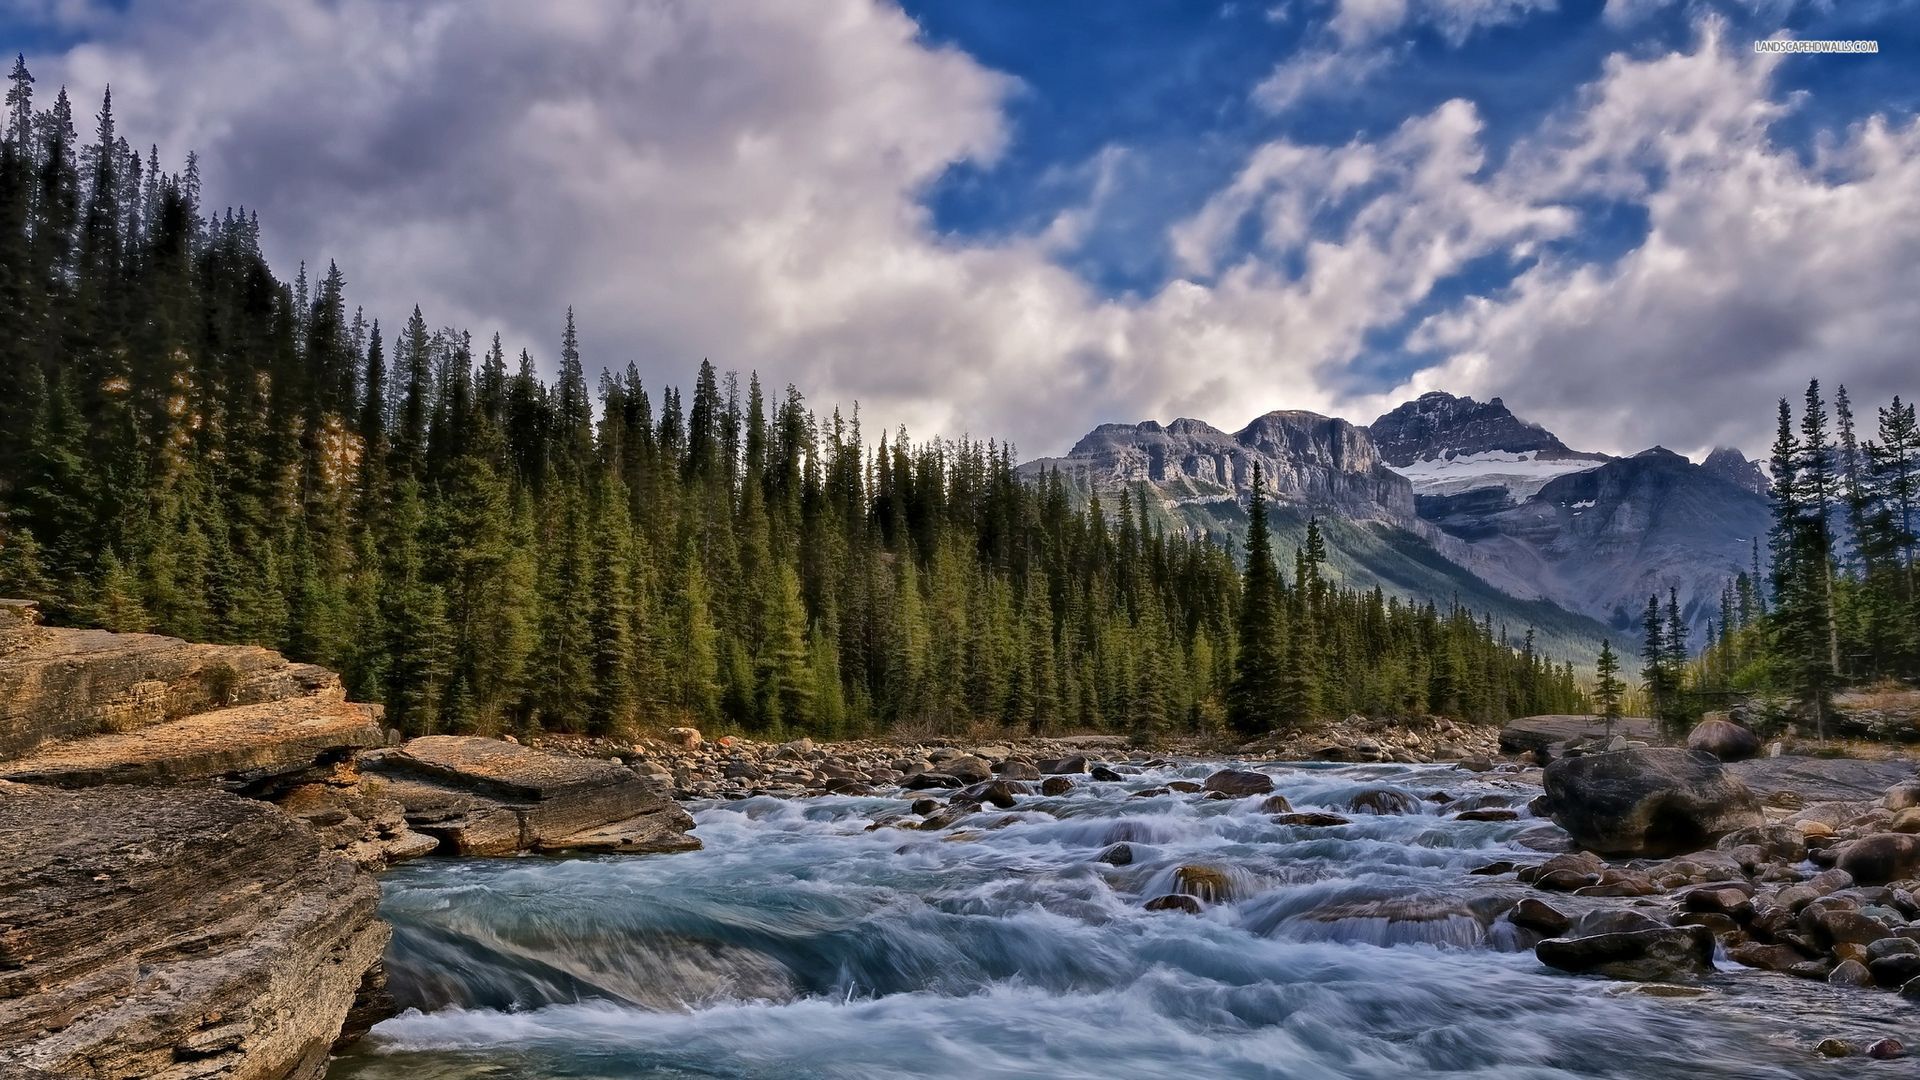 Banff National Park, canada, mountain, forest, tree, river, sky, cloud, nature desktop PC and Mac wallpaper